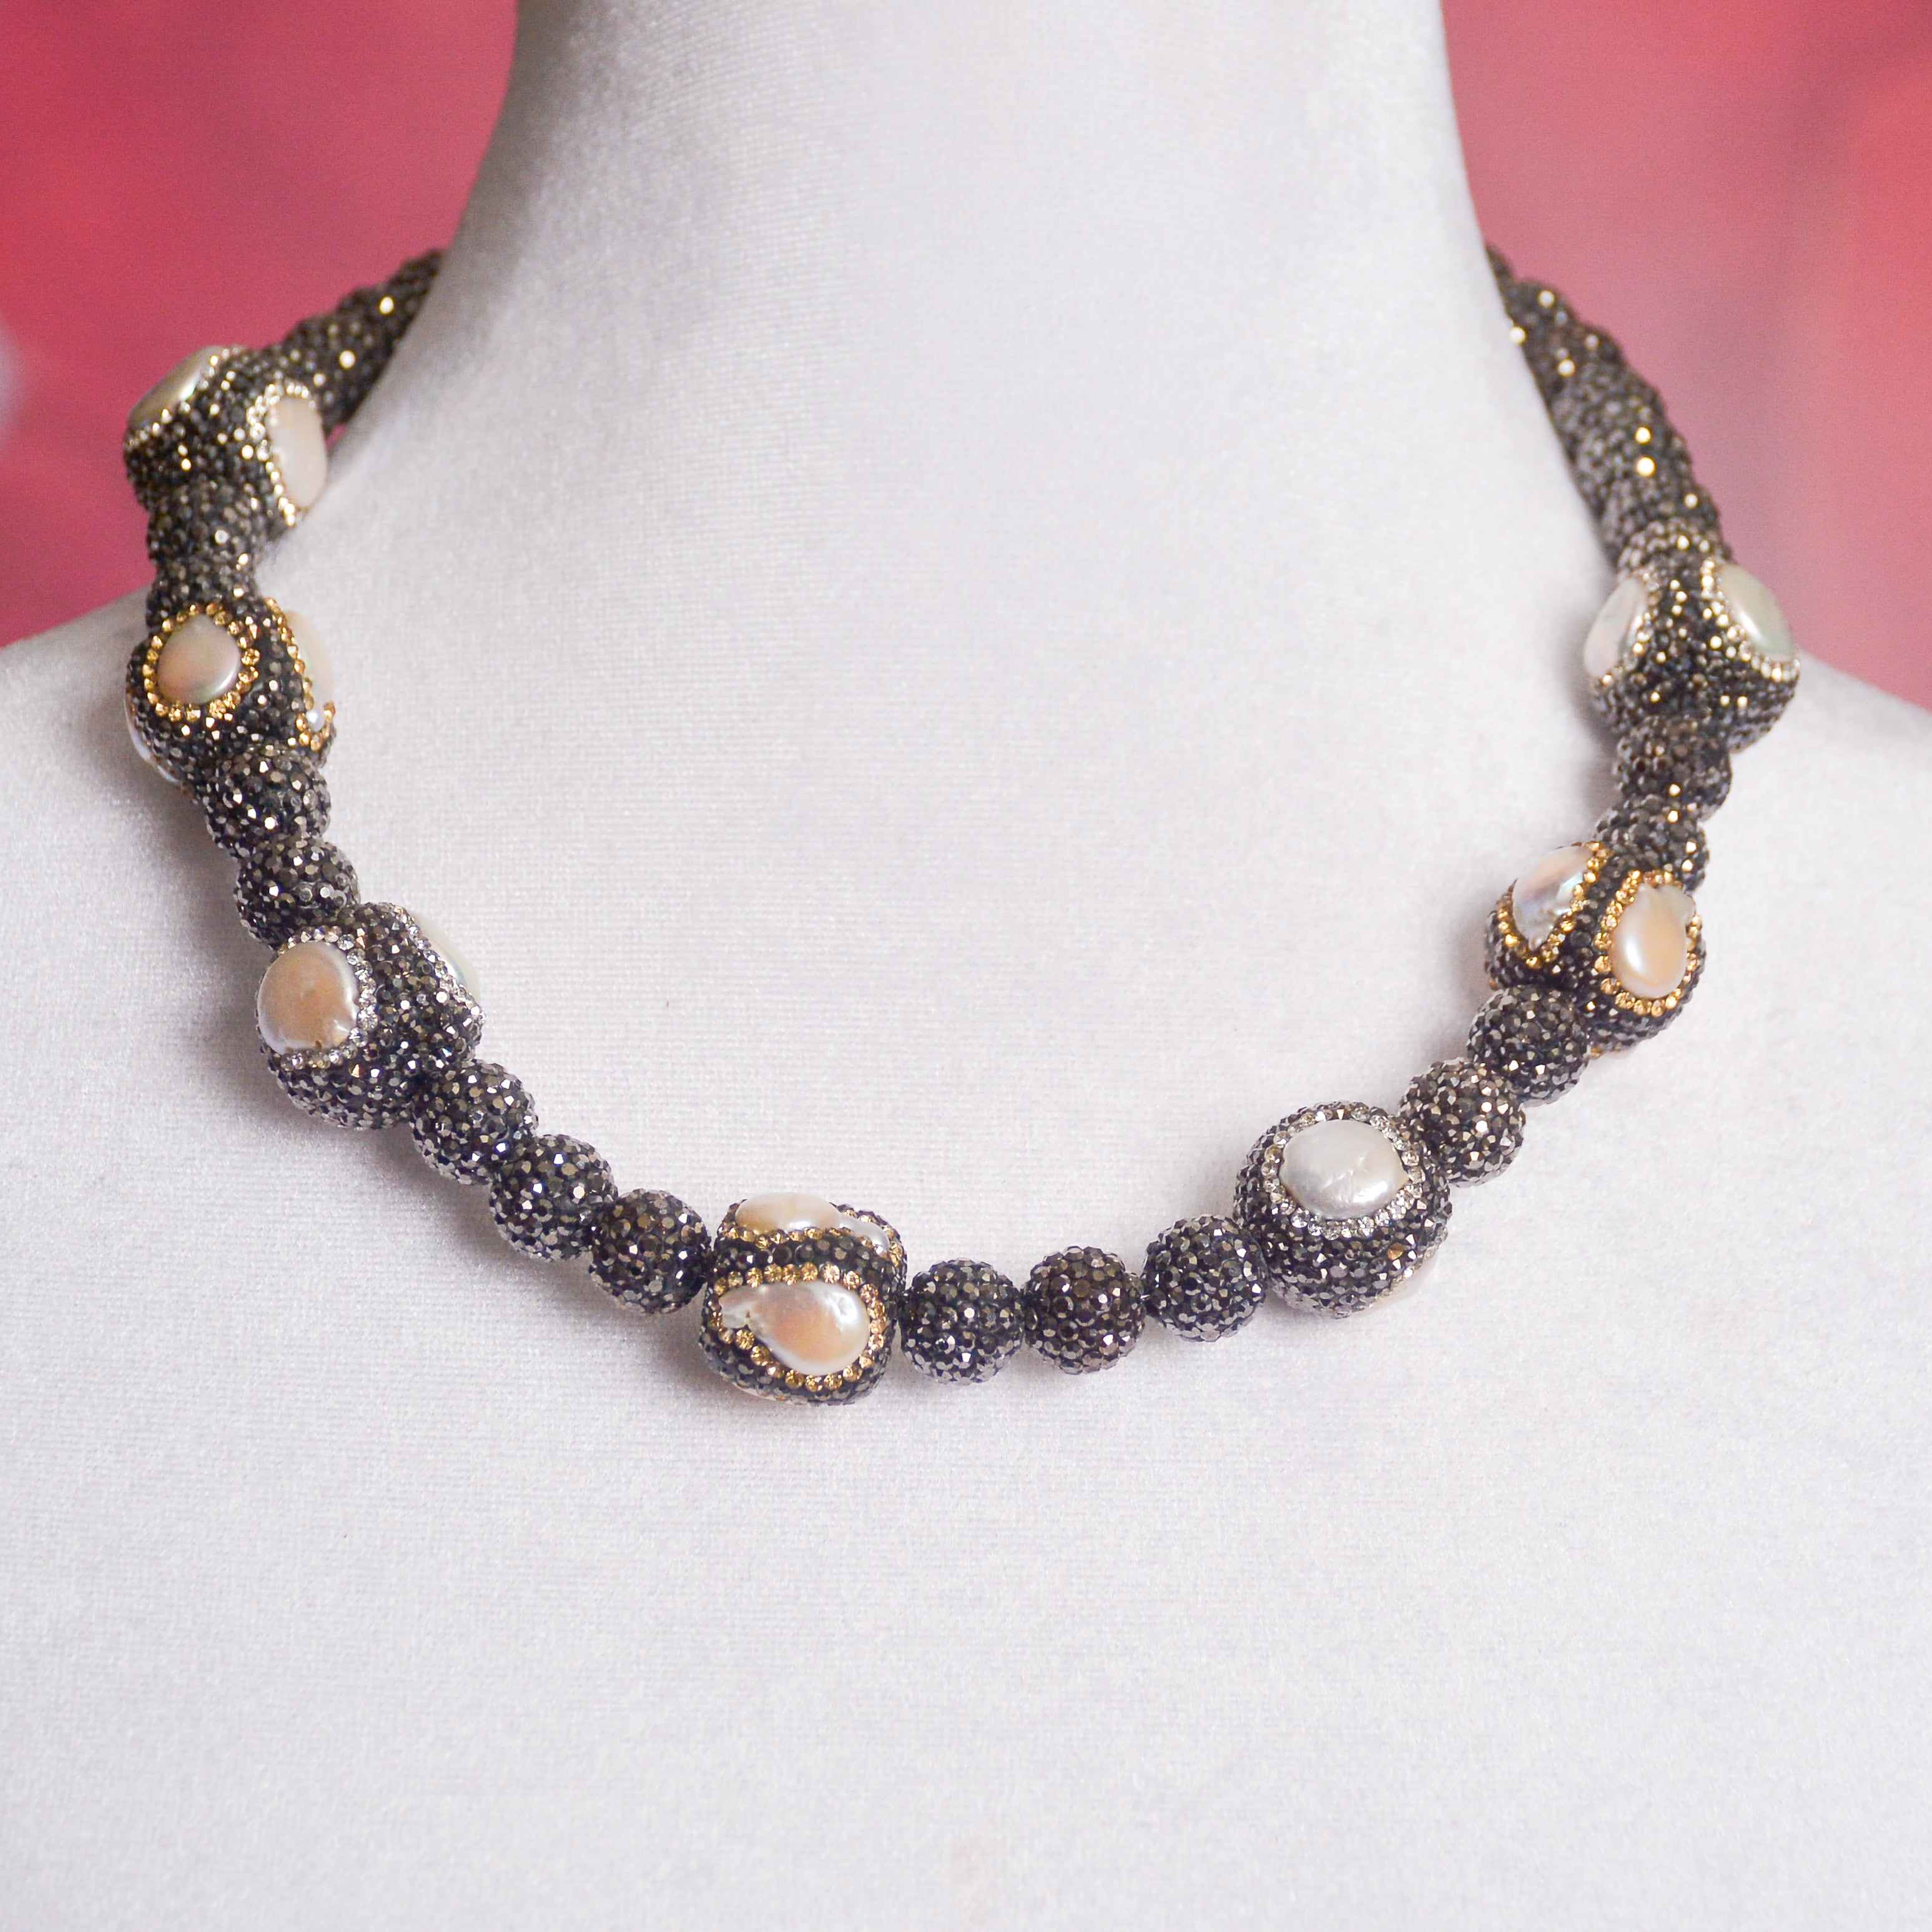 Pearl's Embrace: Hematite Shamballa Mother of Pearl Collar Necklace